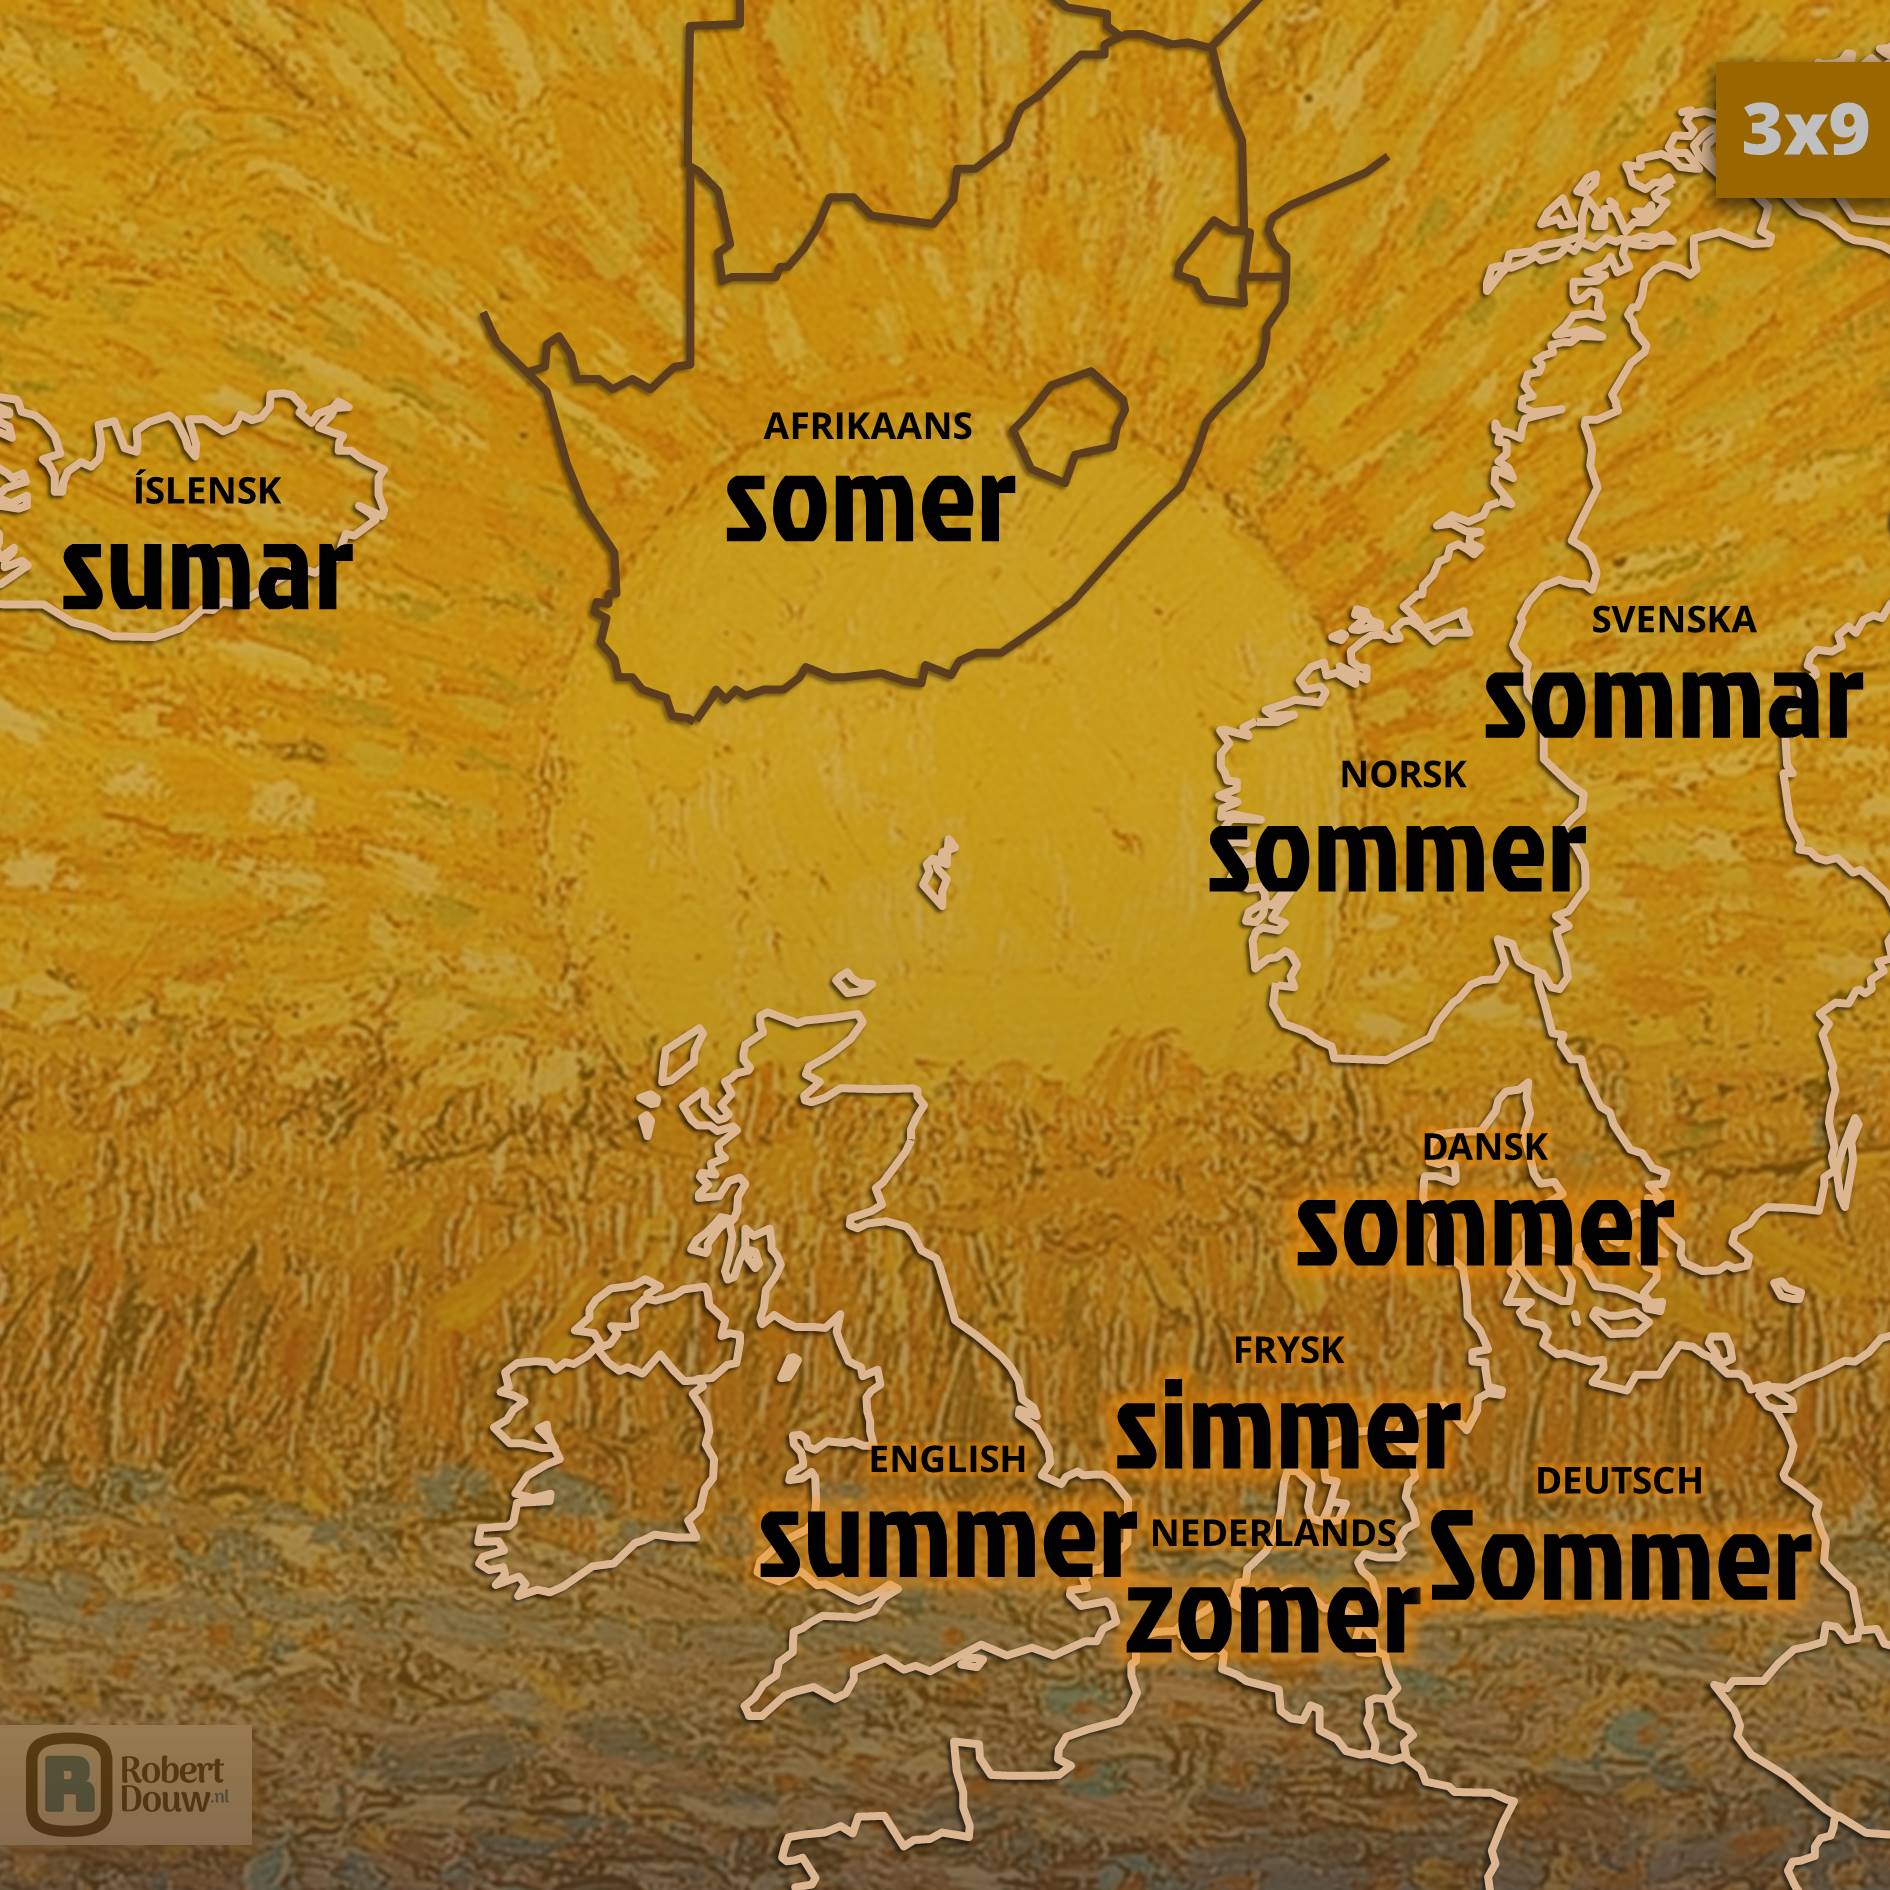 'zomer' in nine languages.